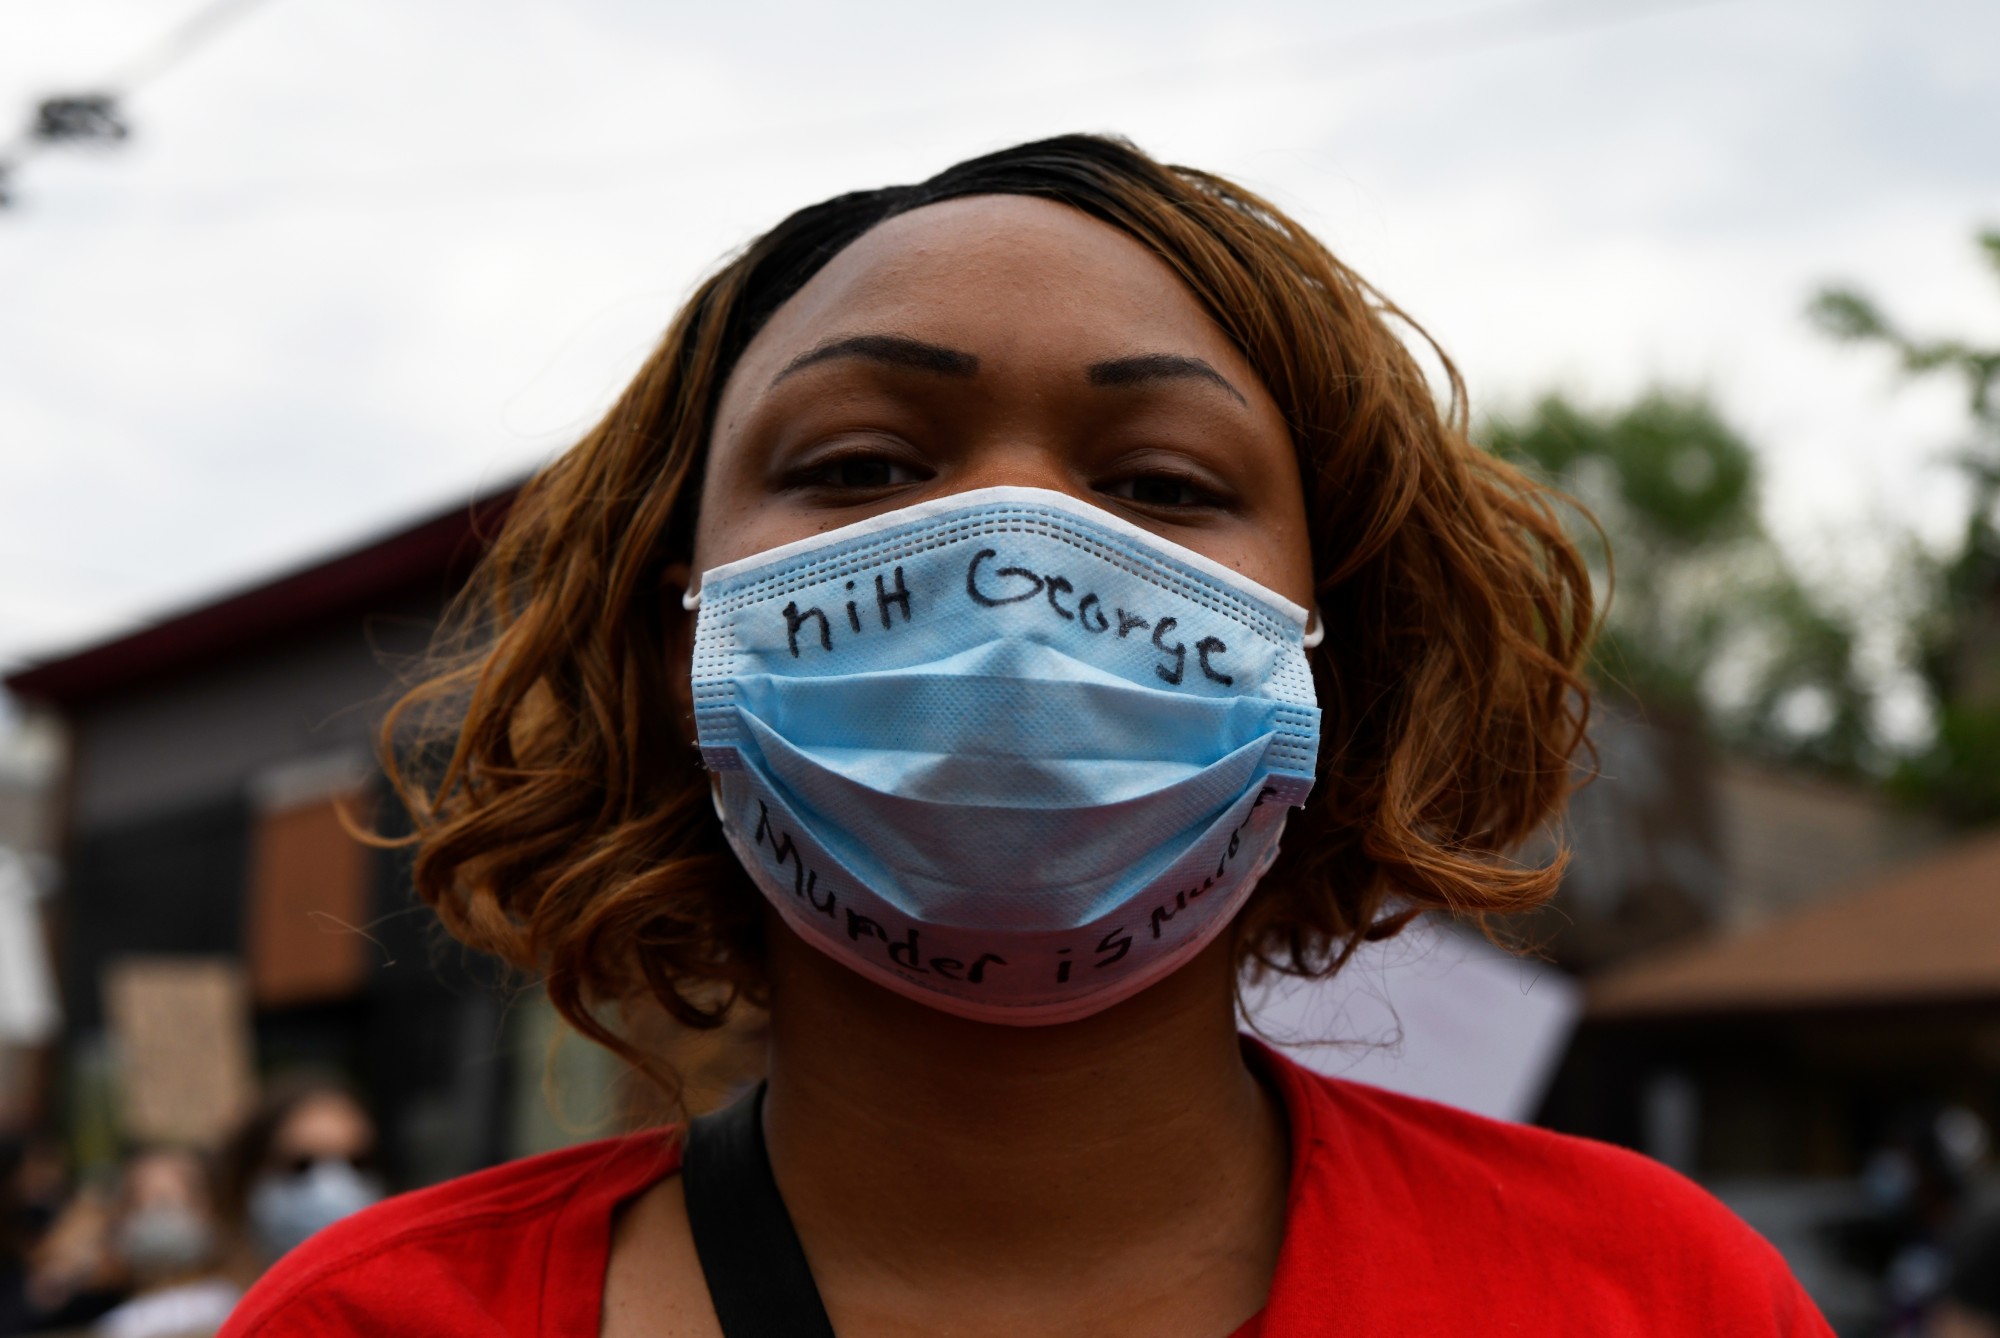 Alyssa Plunkett poses for a portrait wearing a mask that reads “RiH George” and “Murder is Murder” during the protest near Cup Foods on Chicago Avenue South in Minneapolis on Tuesday, May 26. Plunkett lives in the neighborhood and goes by Cup Foods every day. “This is my community, I’m not going to walk in fear,” Plunkett said. The protest was in response to the death of George Floyd in police custody. 